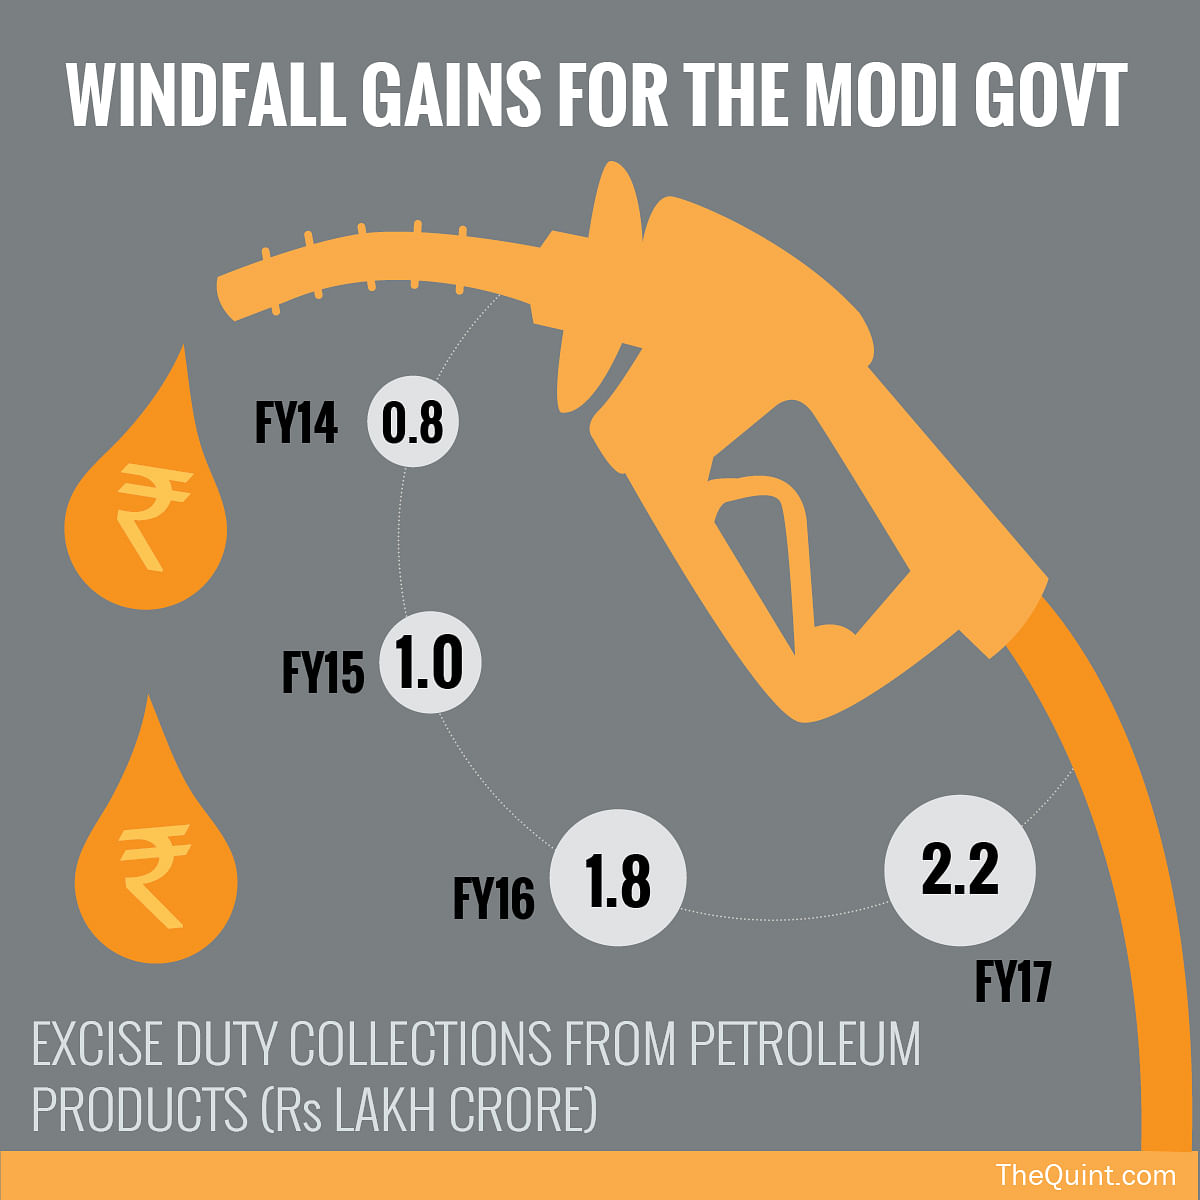 Despite a fall in crude oil prices, consumption & investment are yet to pick up in Modi’s third year in government.